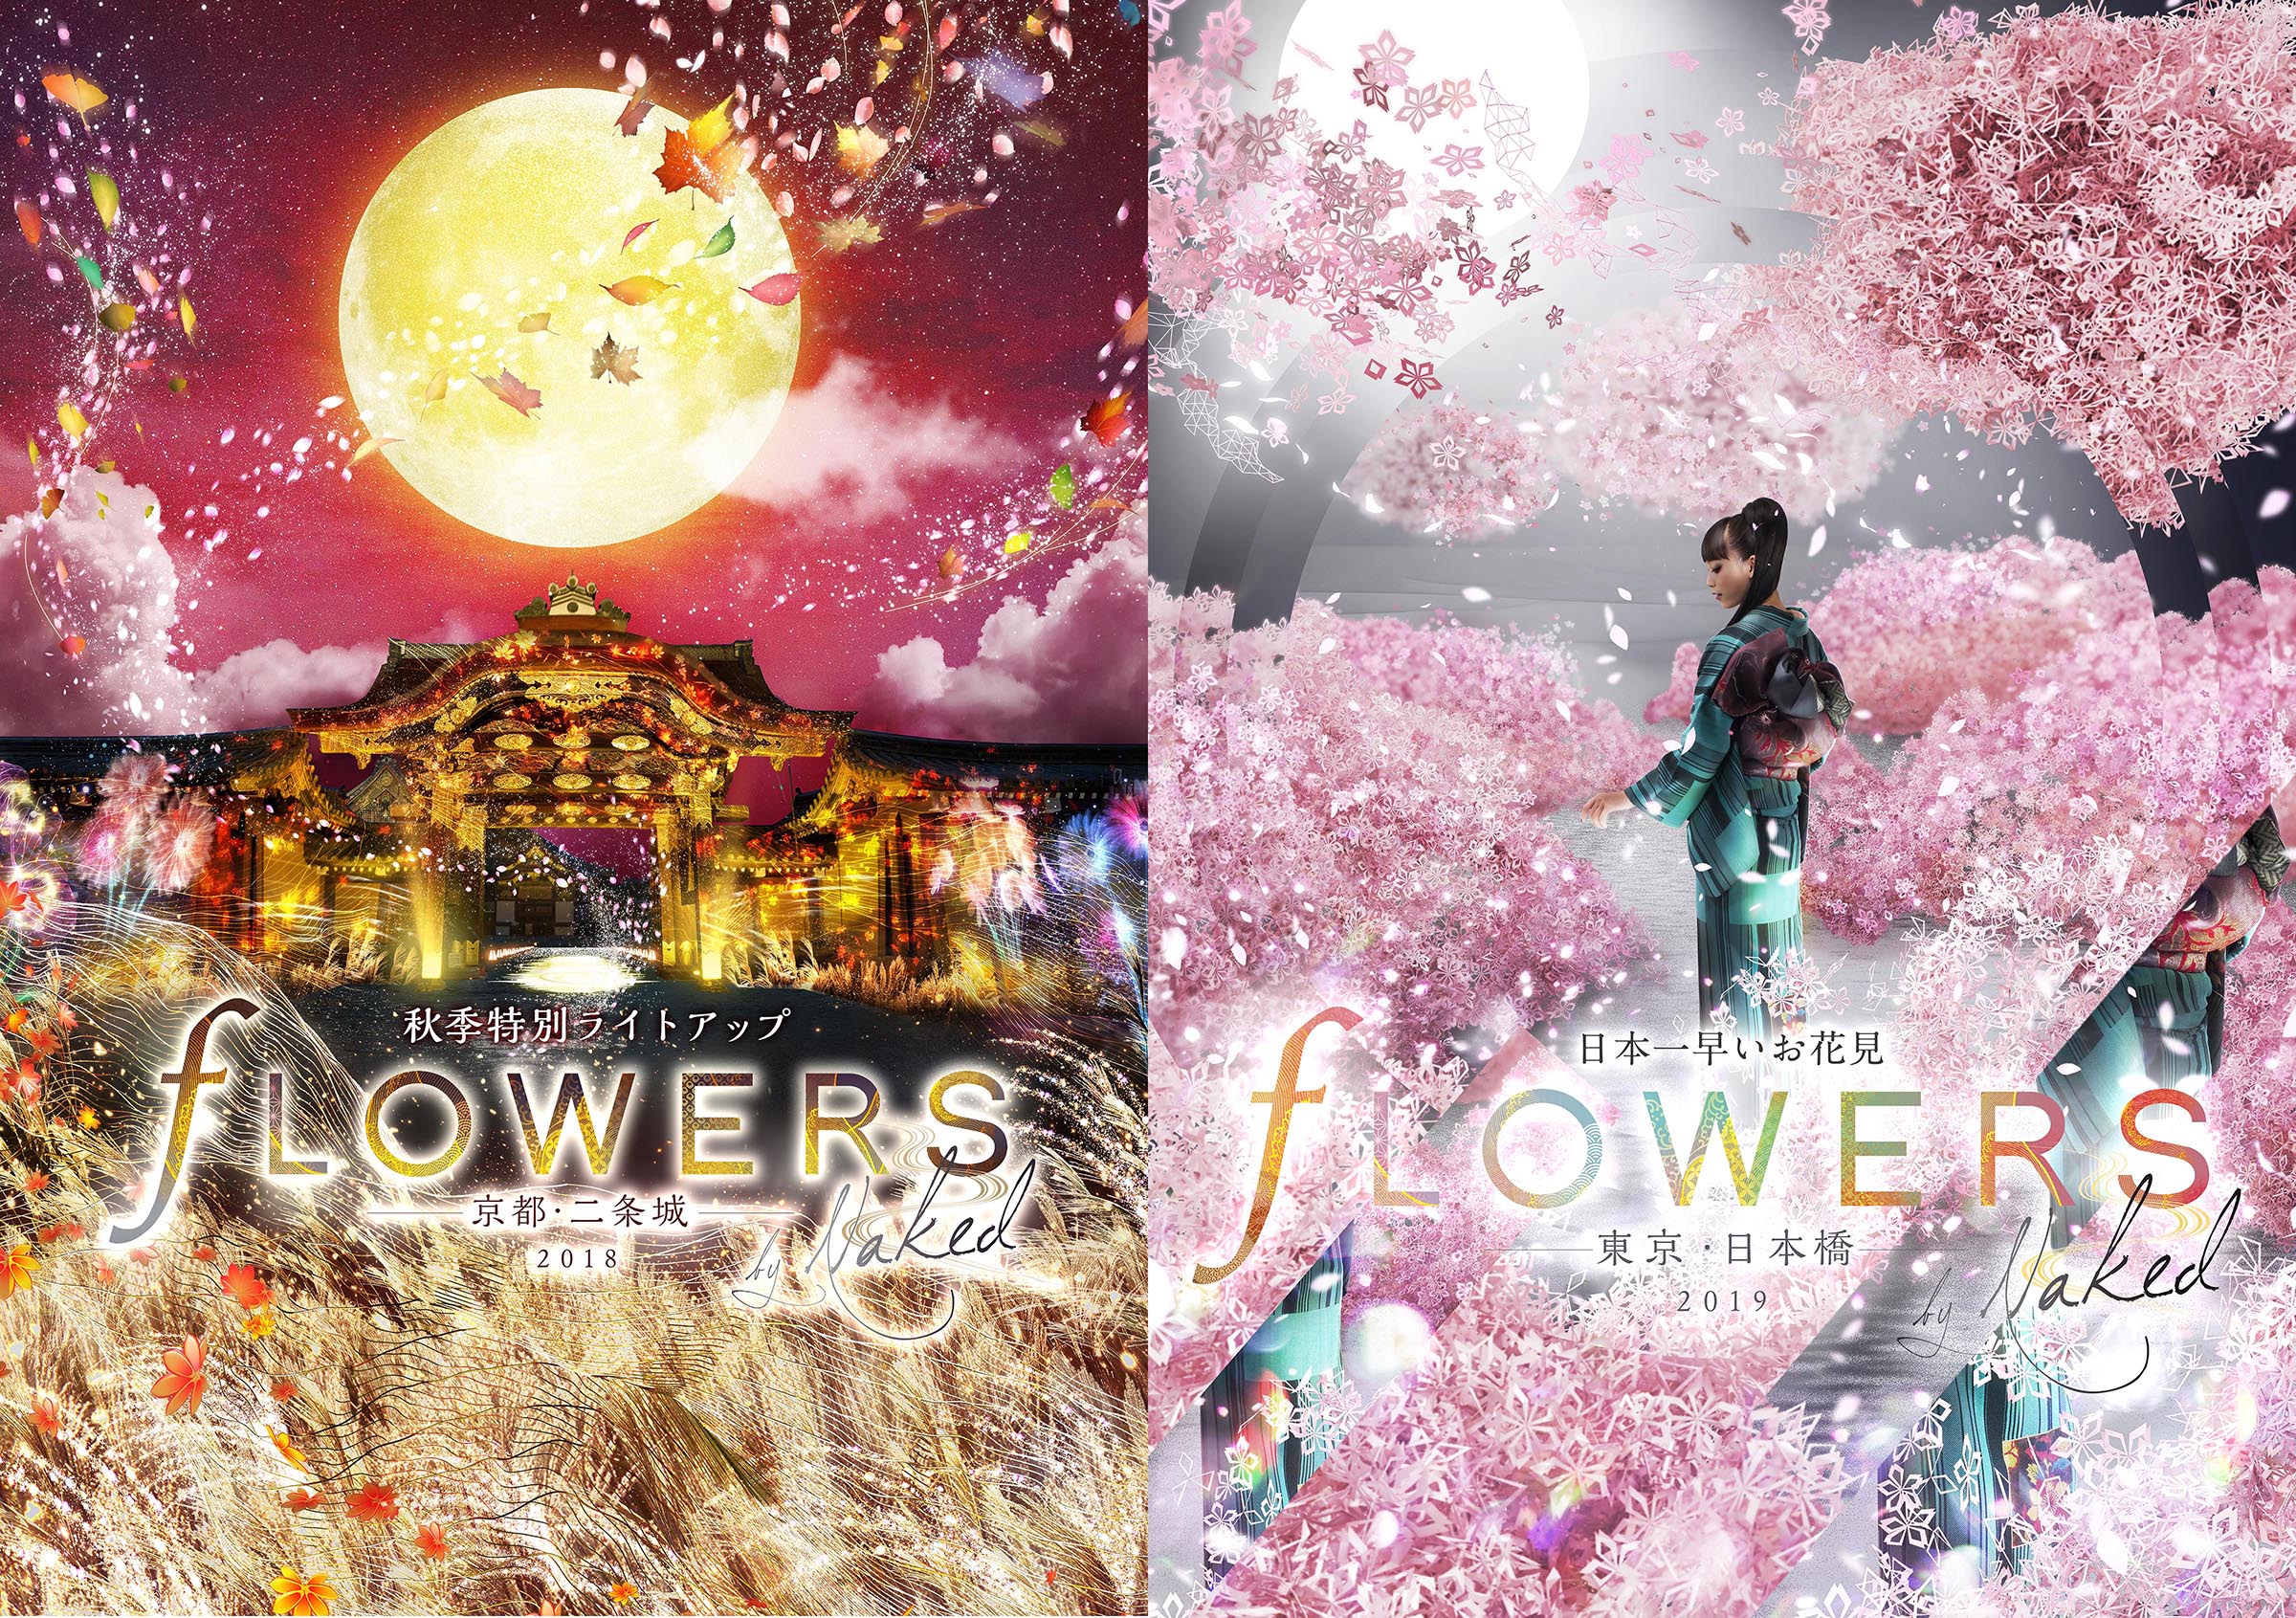 FLOWERS BY NAKED を秋と春で楽しむ、ペア招待券プレゼント NAKED FLOWERS 2021 −桜− 世界遺産・二条城